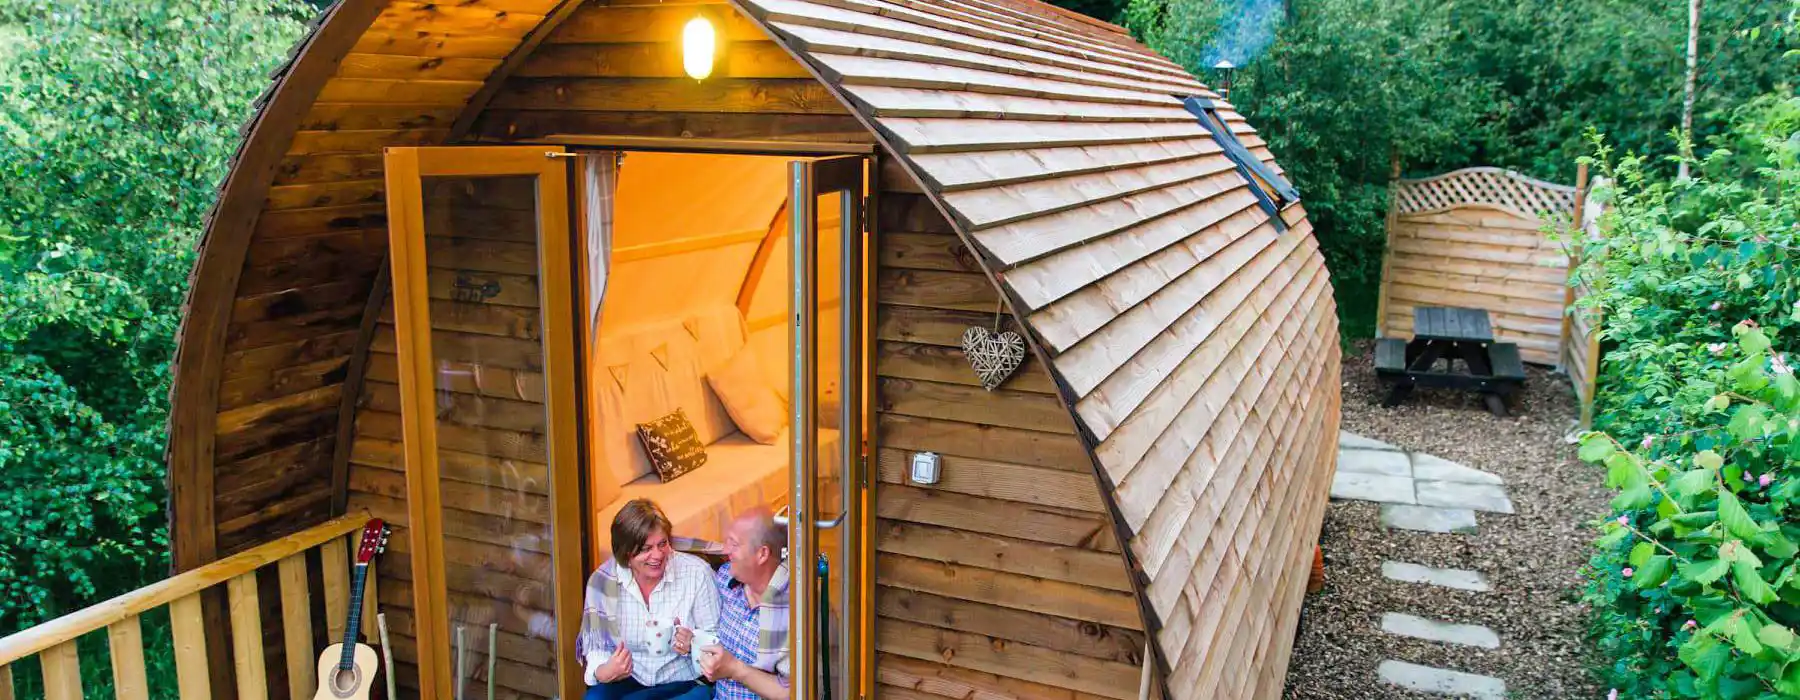 Glamping holidays in Loughborough 